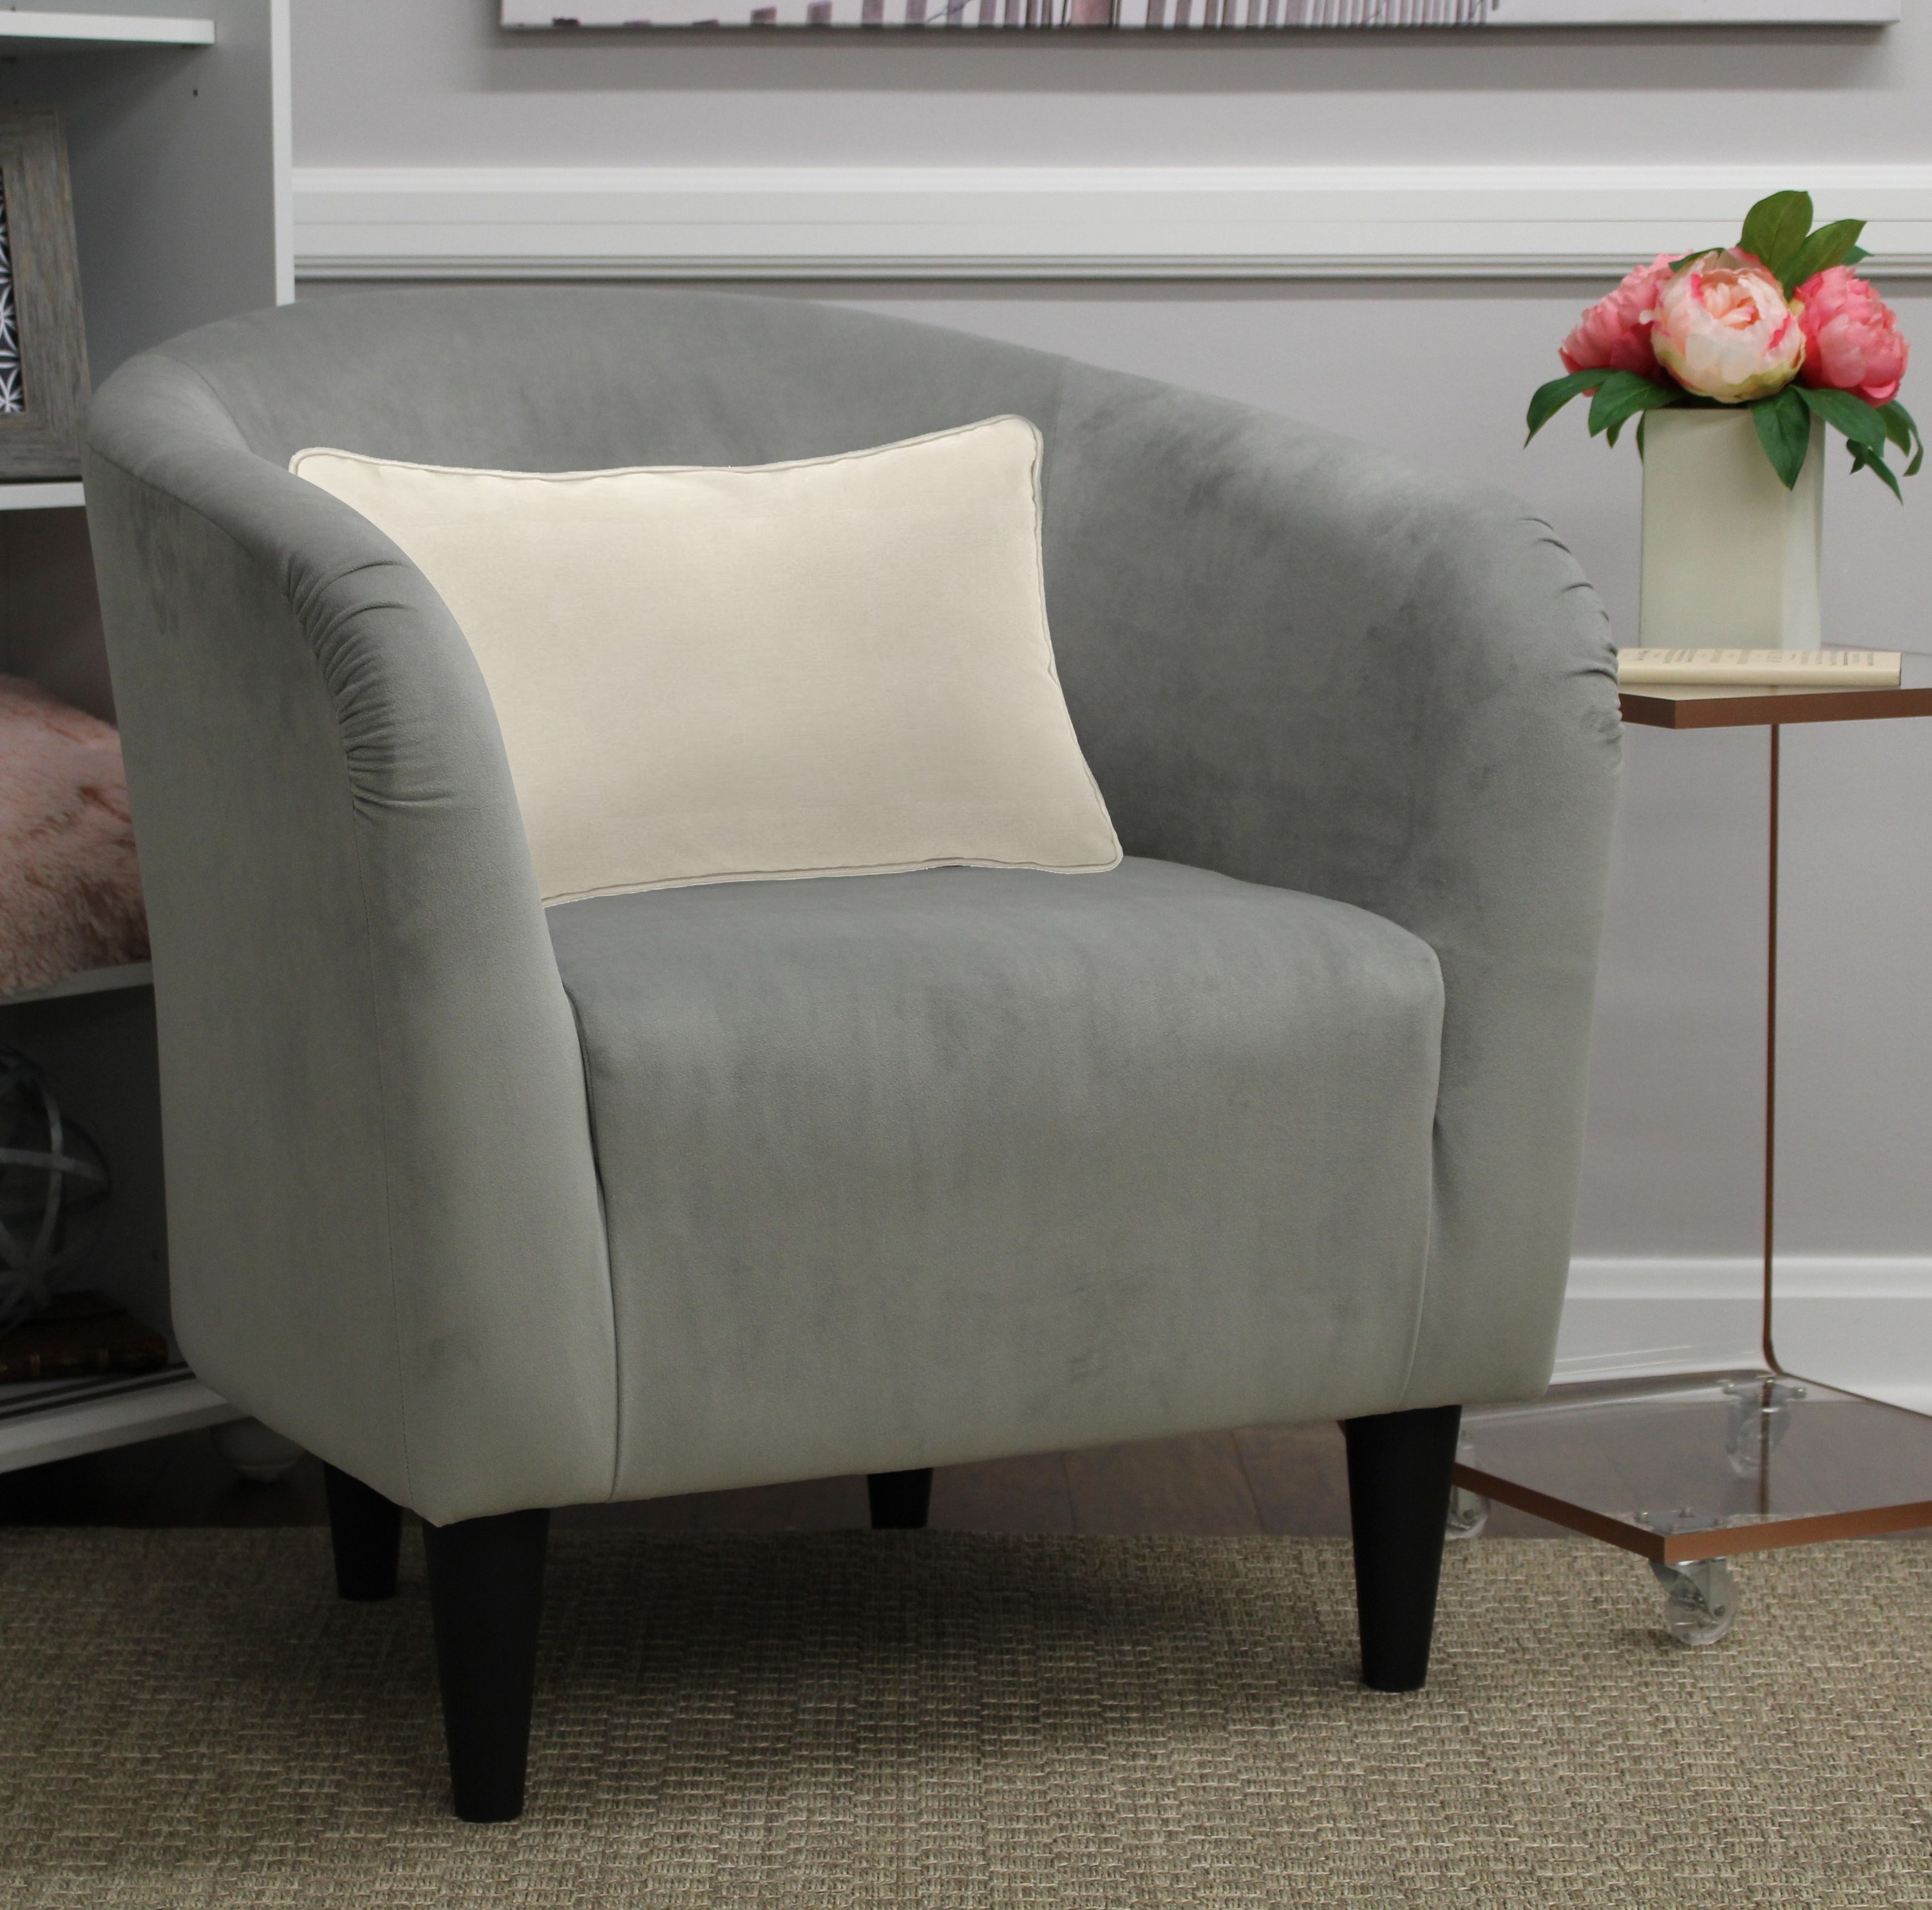 The tub accent chair in the color dove gray